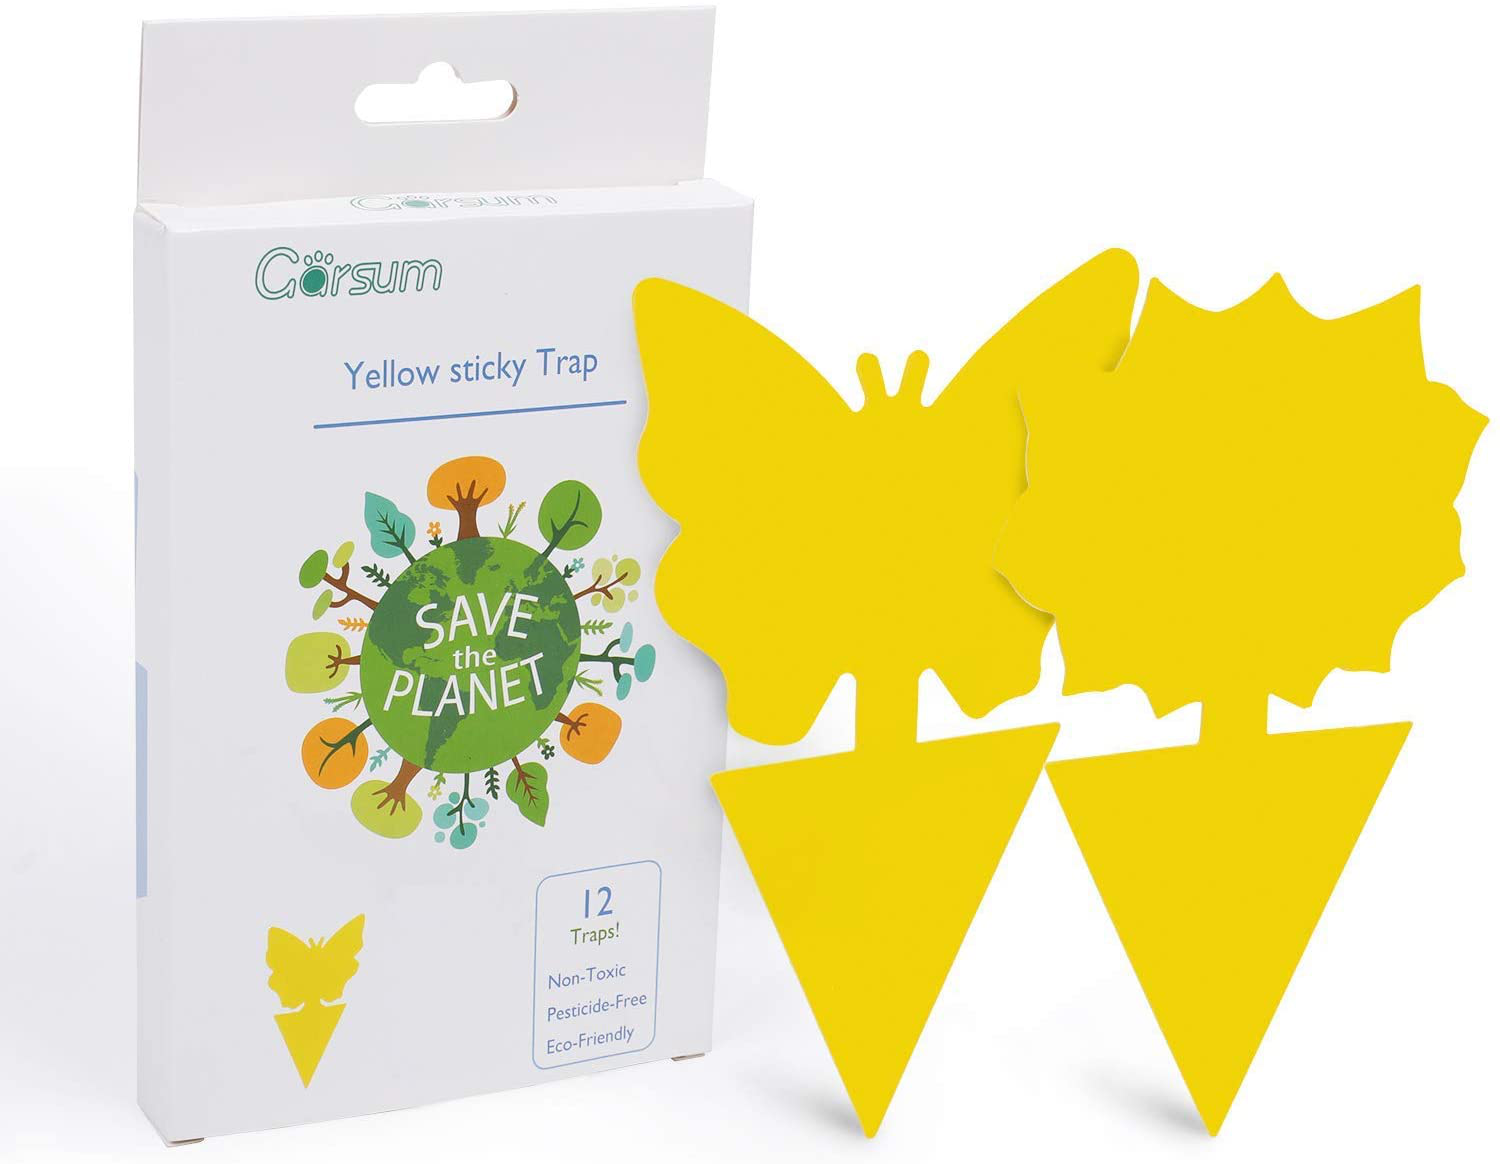 Garsum Sticky Trap,Fruit Fly and Gnat Trap Yellow Sticky Bug Traps for Indoor/Outdoor Use - Insect Catcher for White Flies,Mosquitos,Fungus Gnats,Flying Insects - Disposable Glue Trappers(48 pcs)